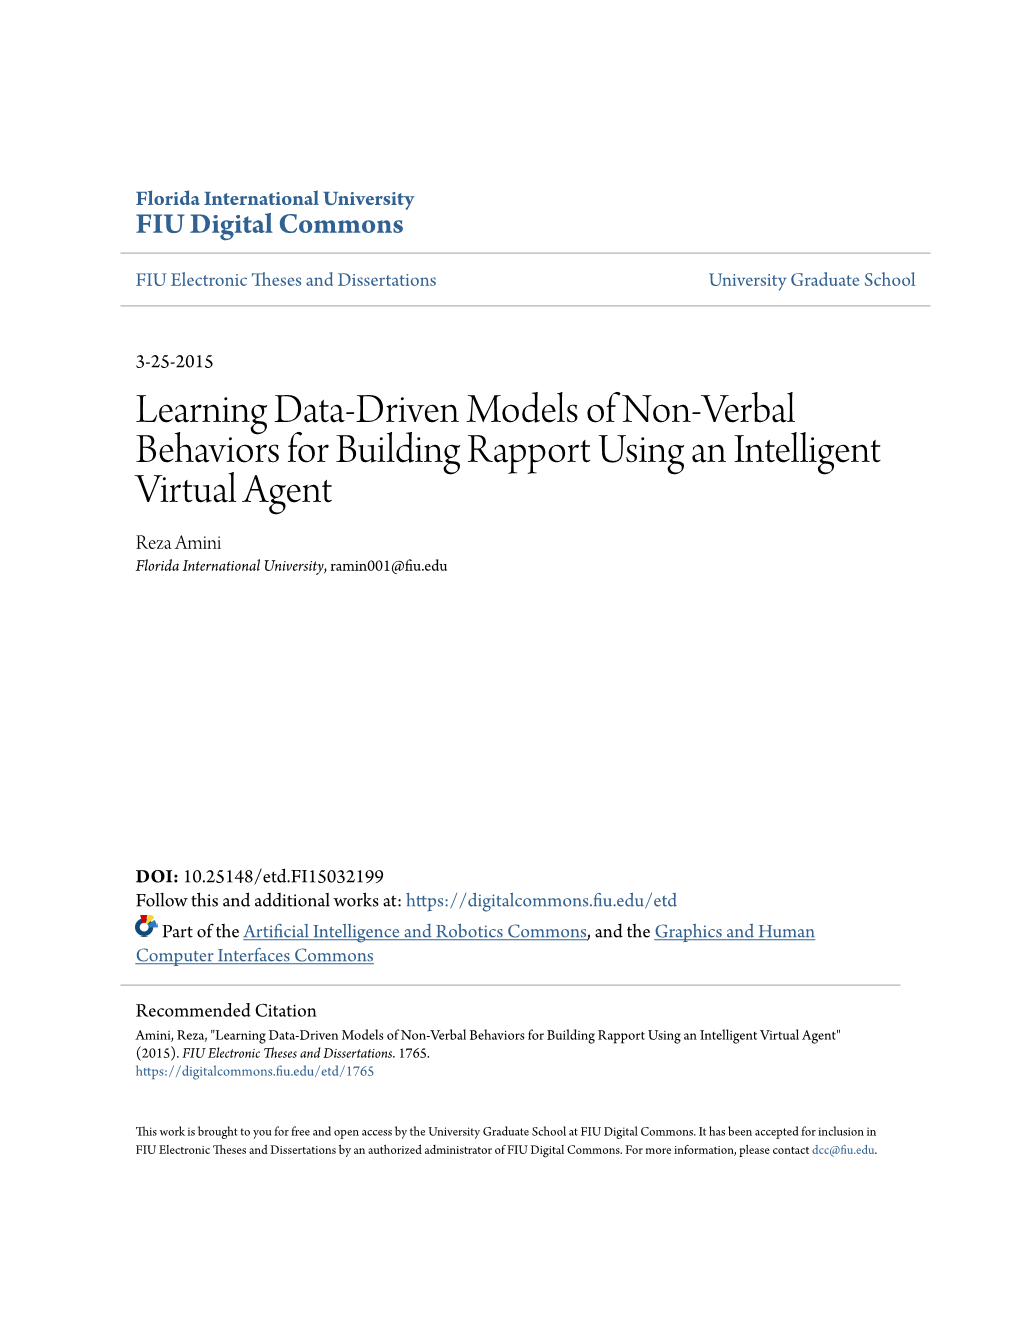 Learning Data-Driven Models of Non-Verbal Behaviors for Building Rapport Using an Intelligent Virtual Agent